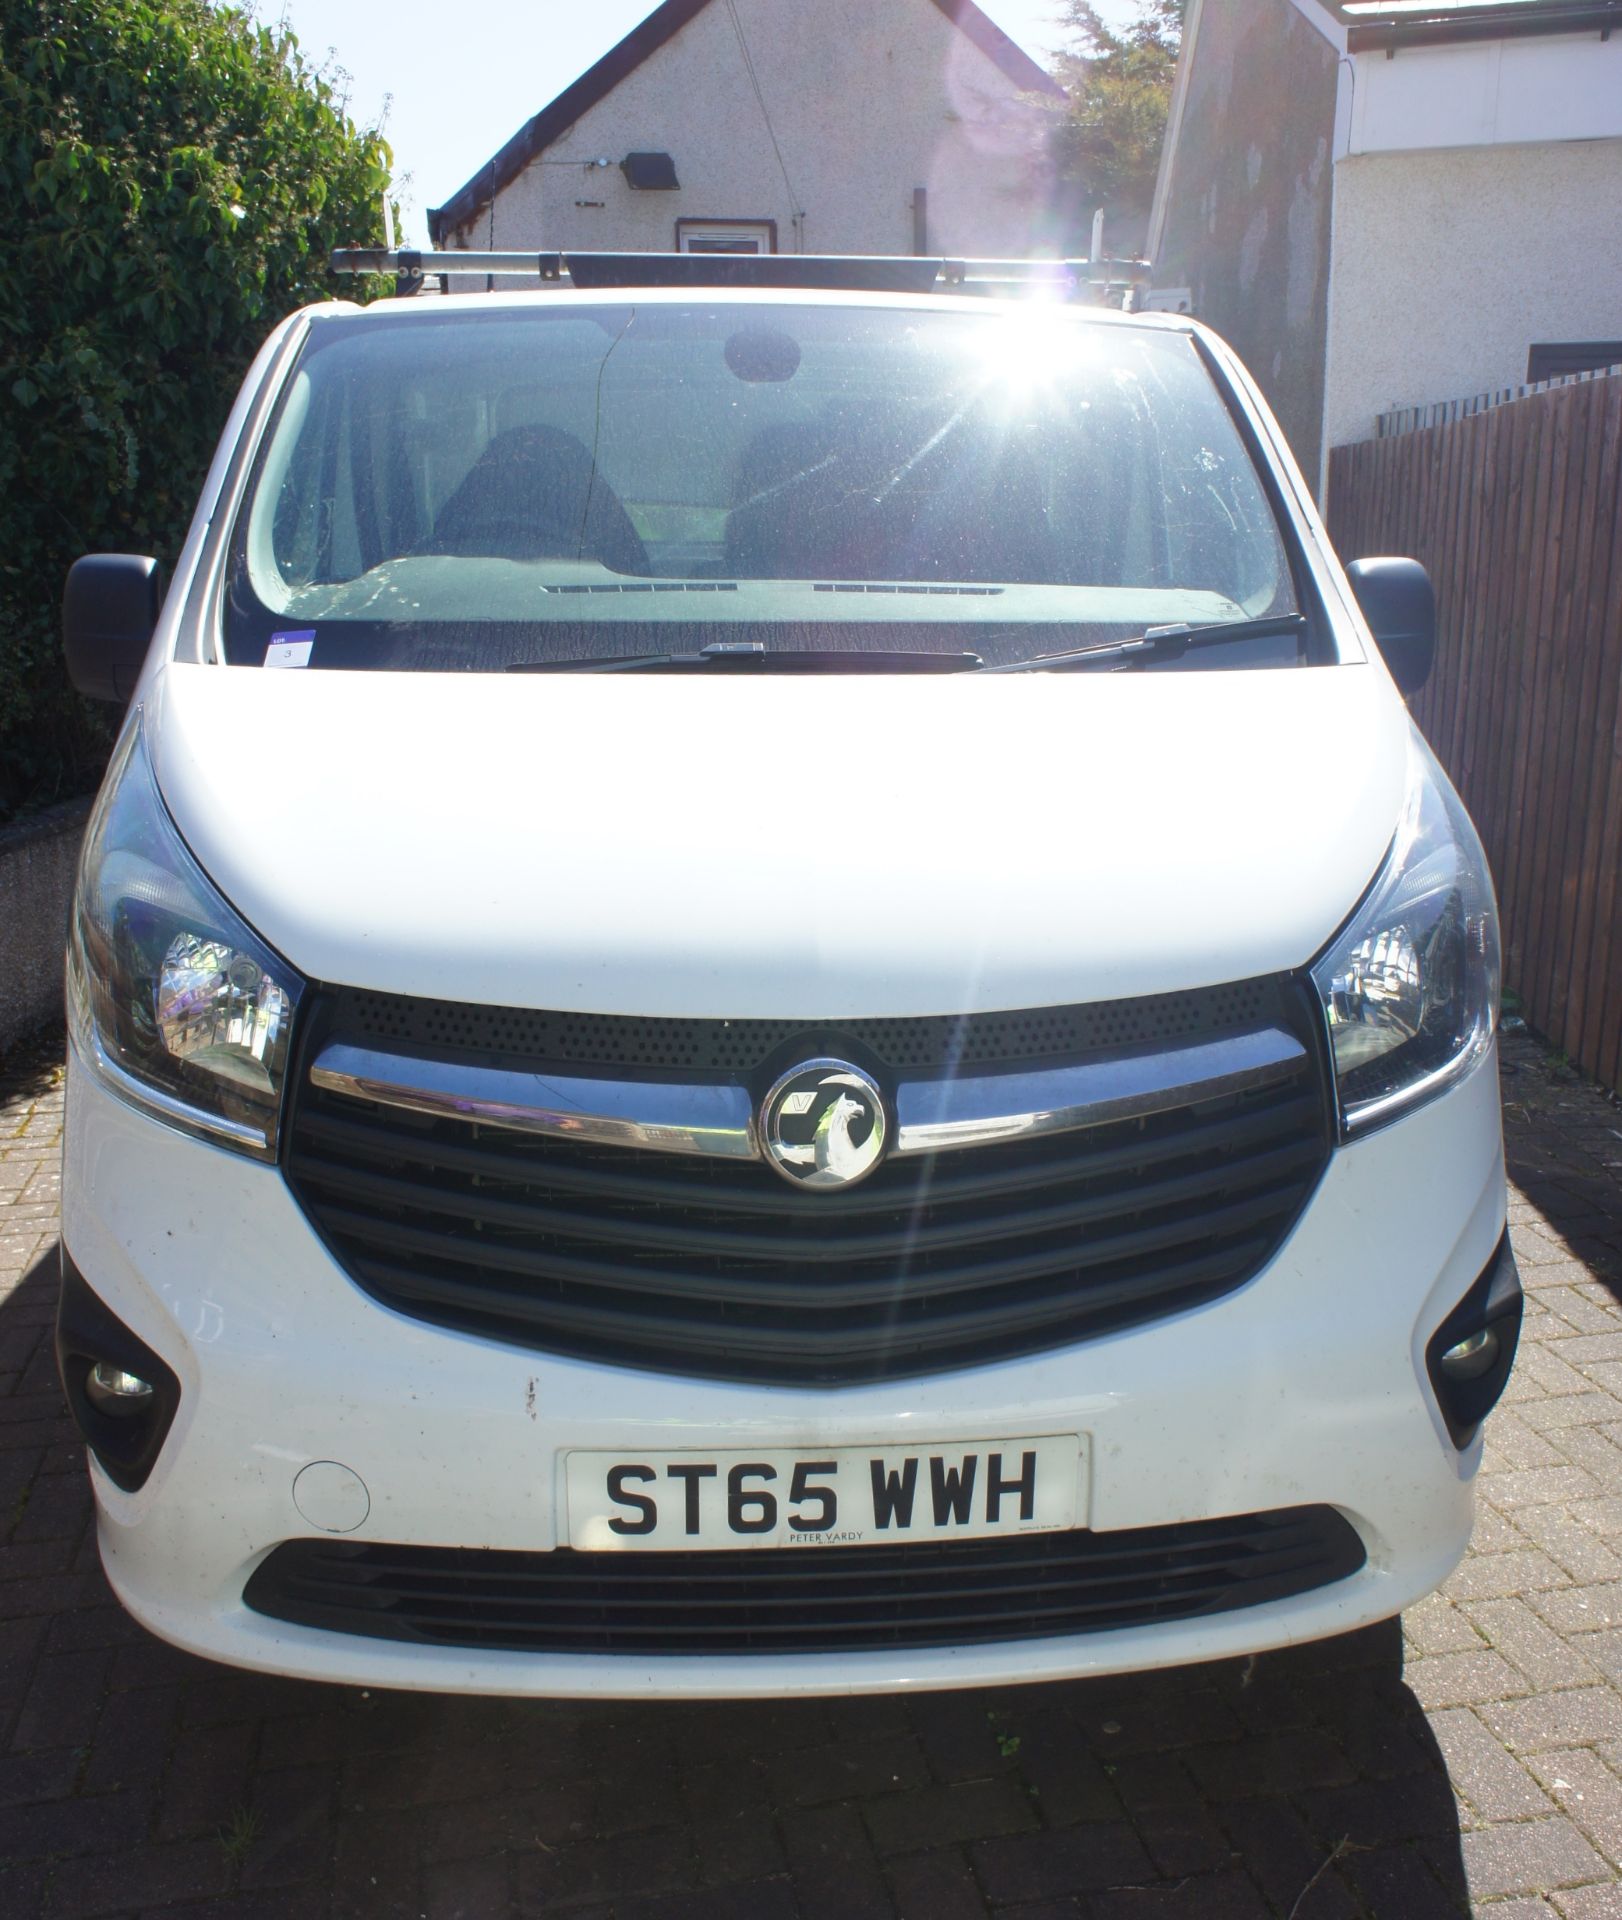 Vauxhall Vivaro, Registration ST65 WWH, Odometer 60,078 miles, No current MOT, Date of first - Image 3 of 12